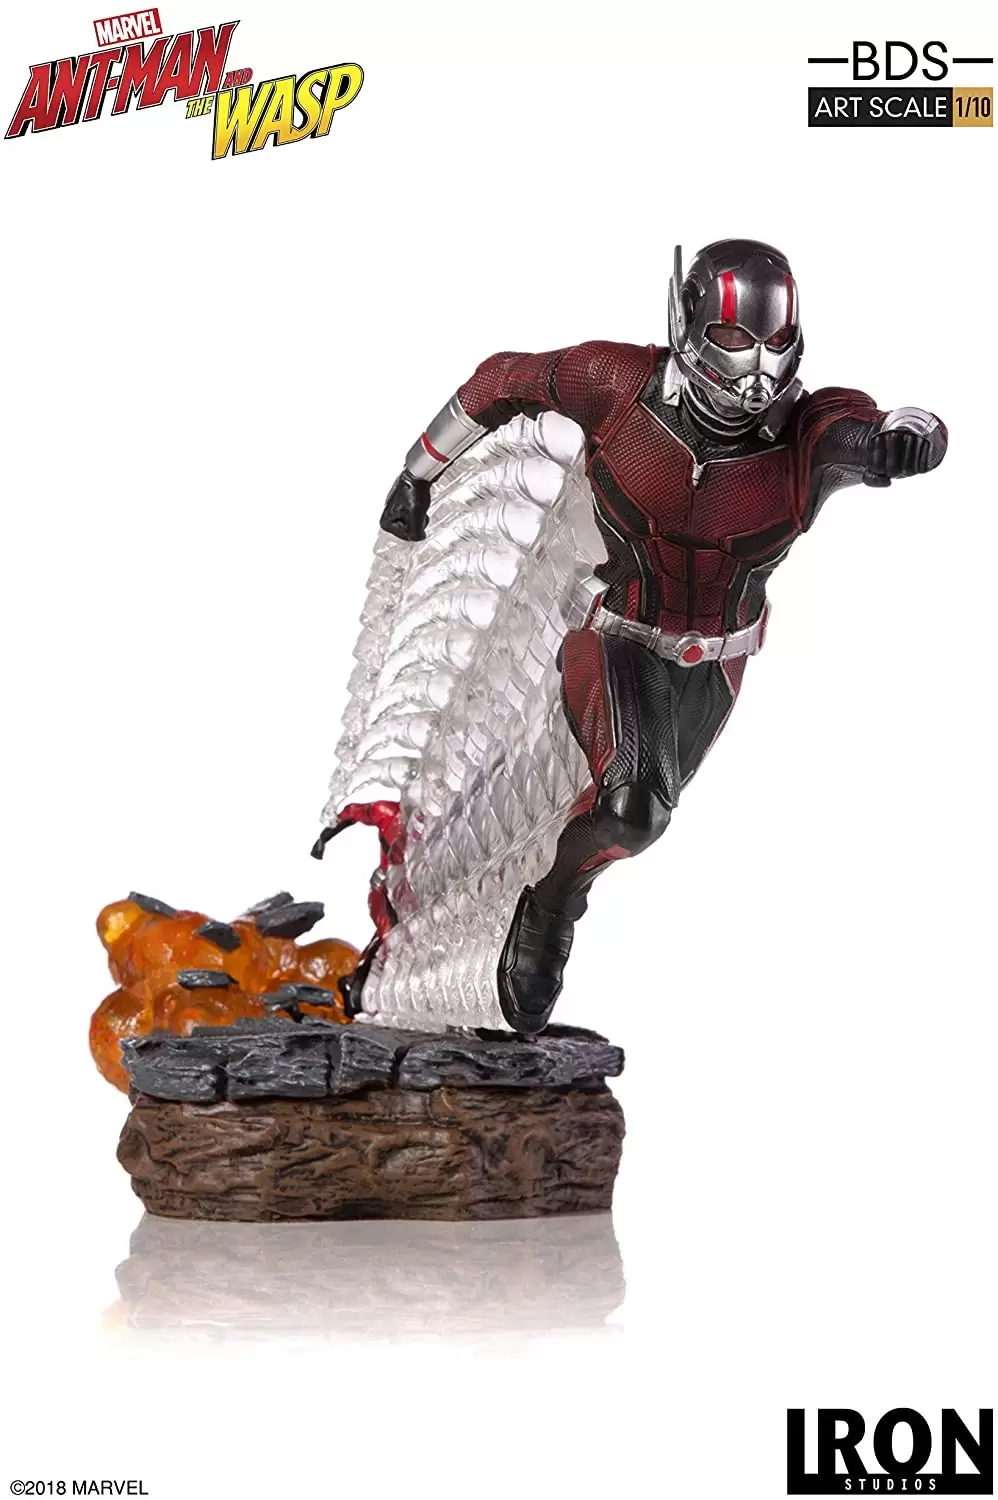 Iron Studios - Ant-Man and The Wasp - Ant-Man - BDS Art Scale